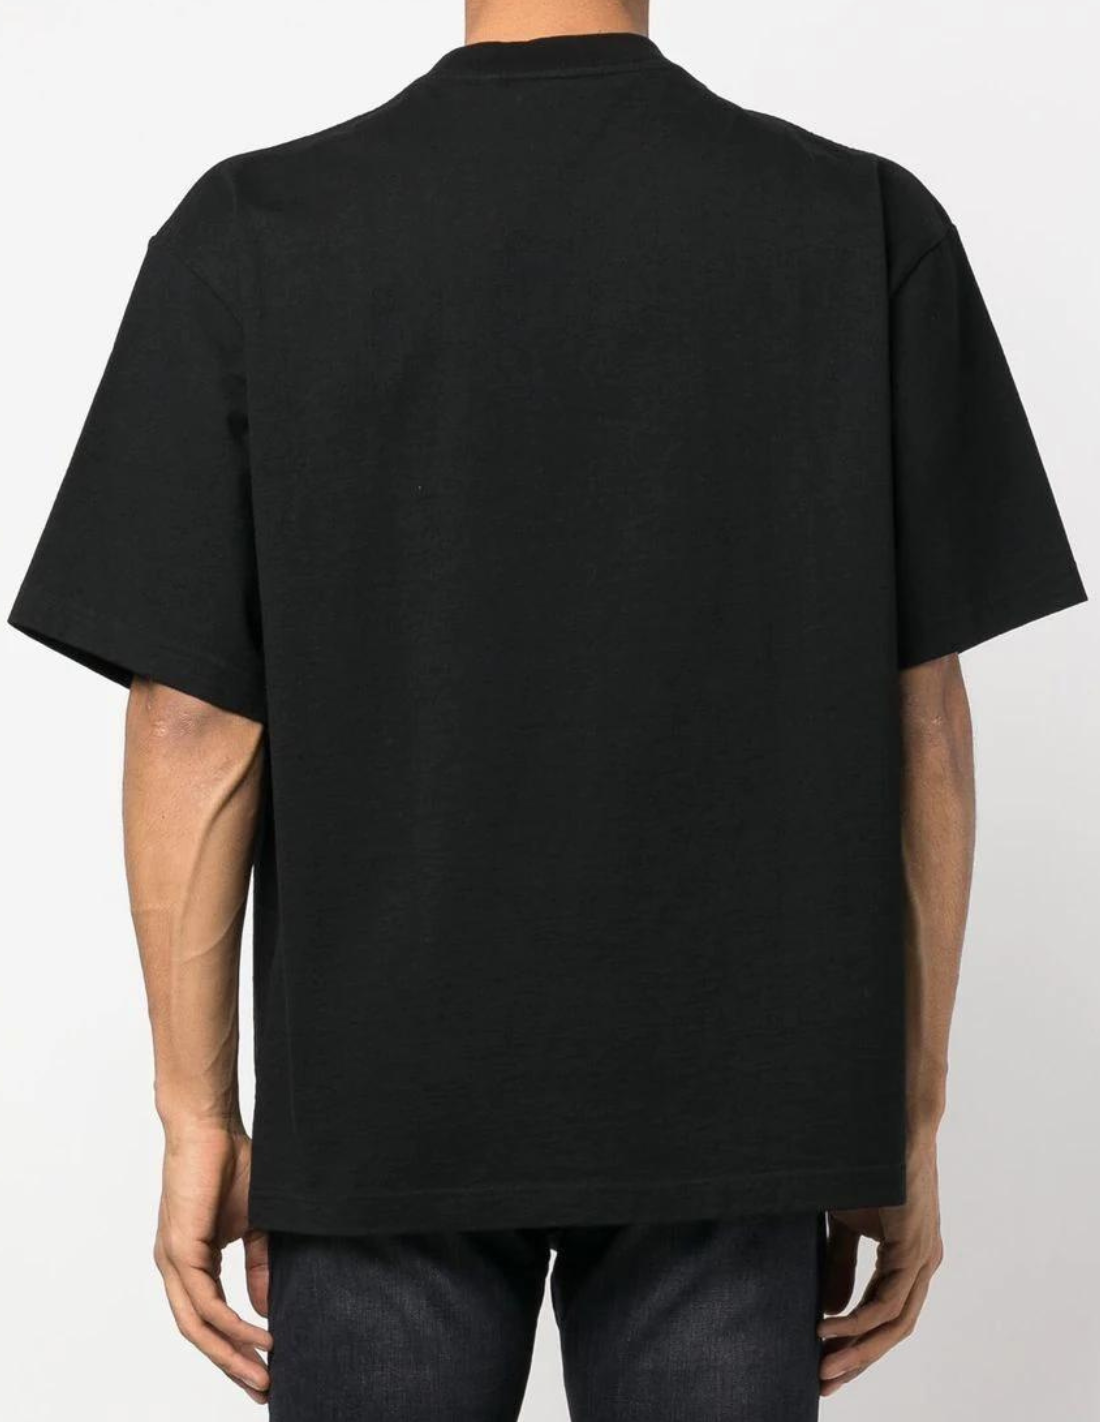 AXEL ARIGATO t-shirt with sponge patch - black